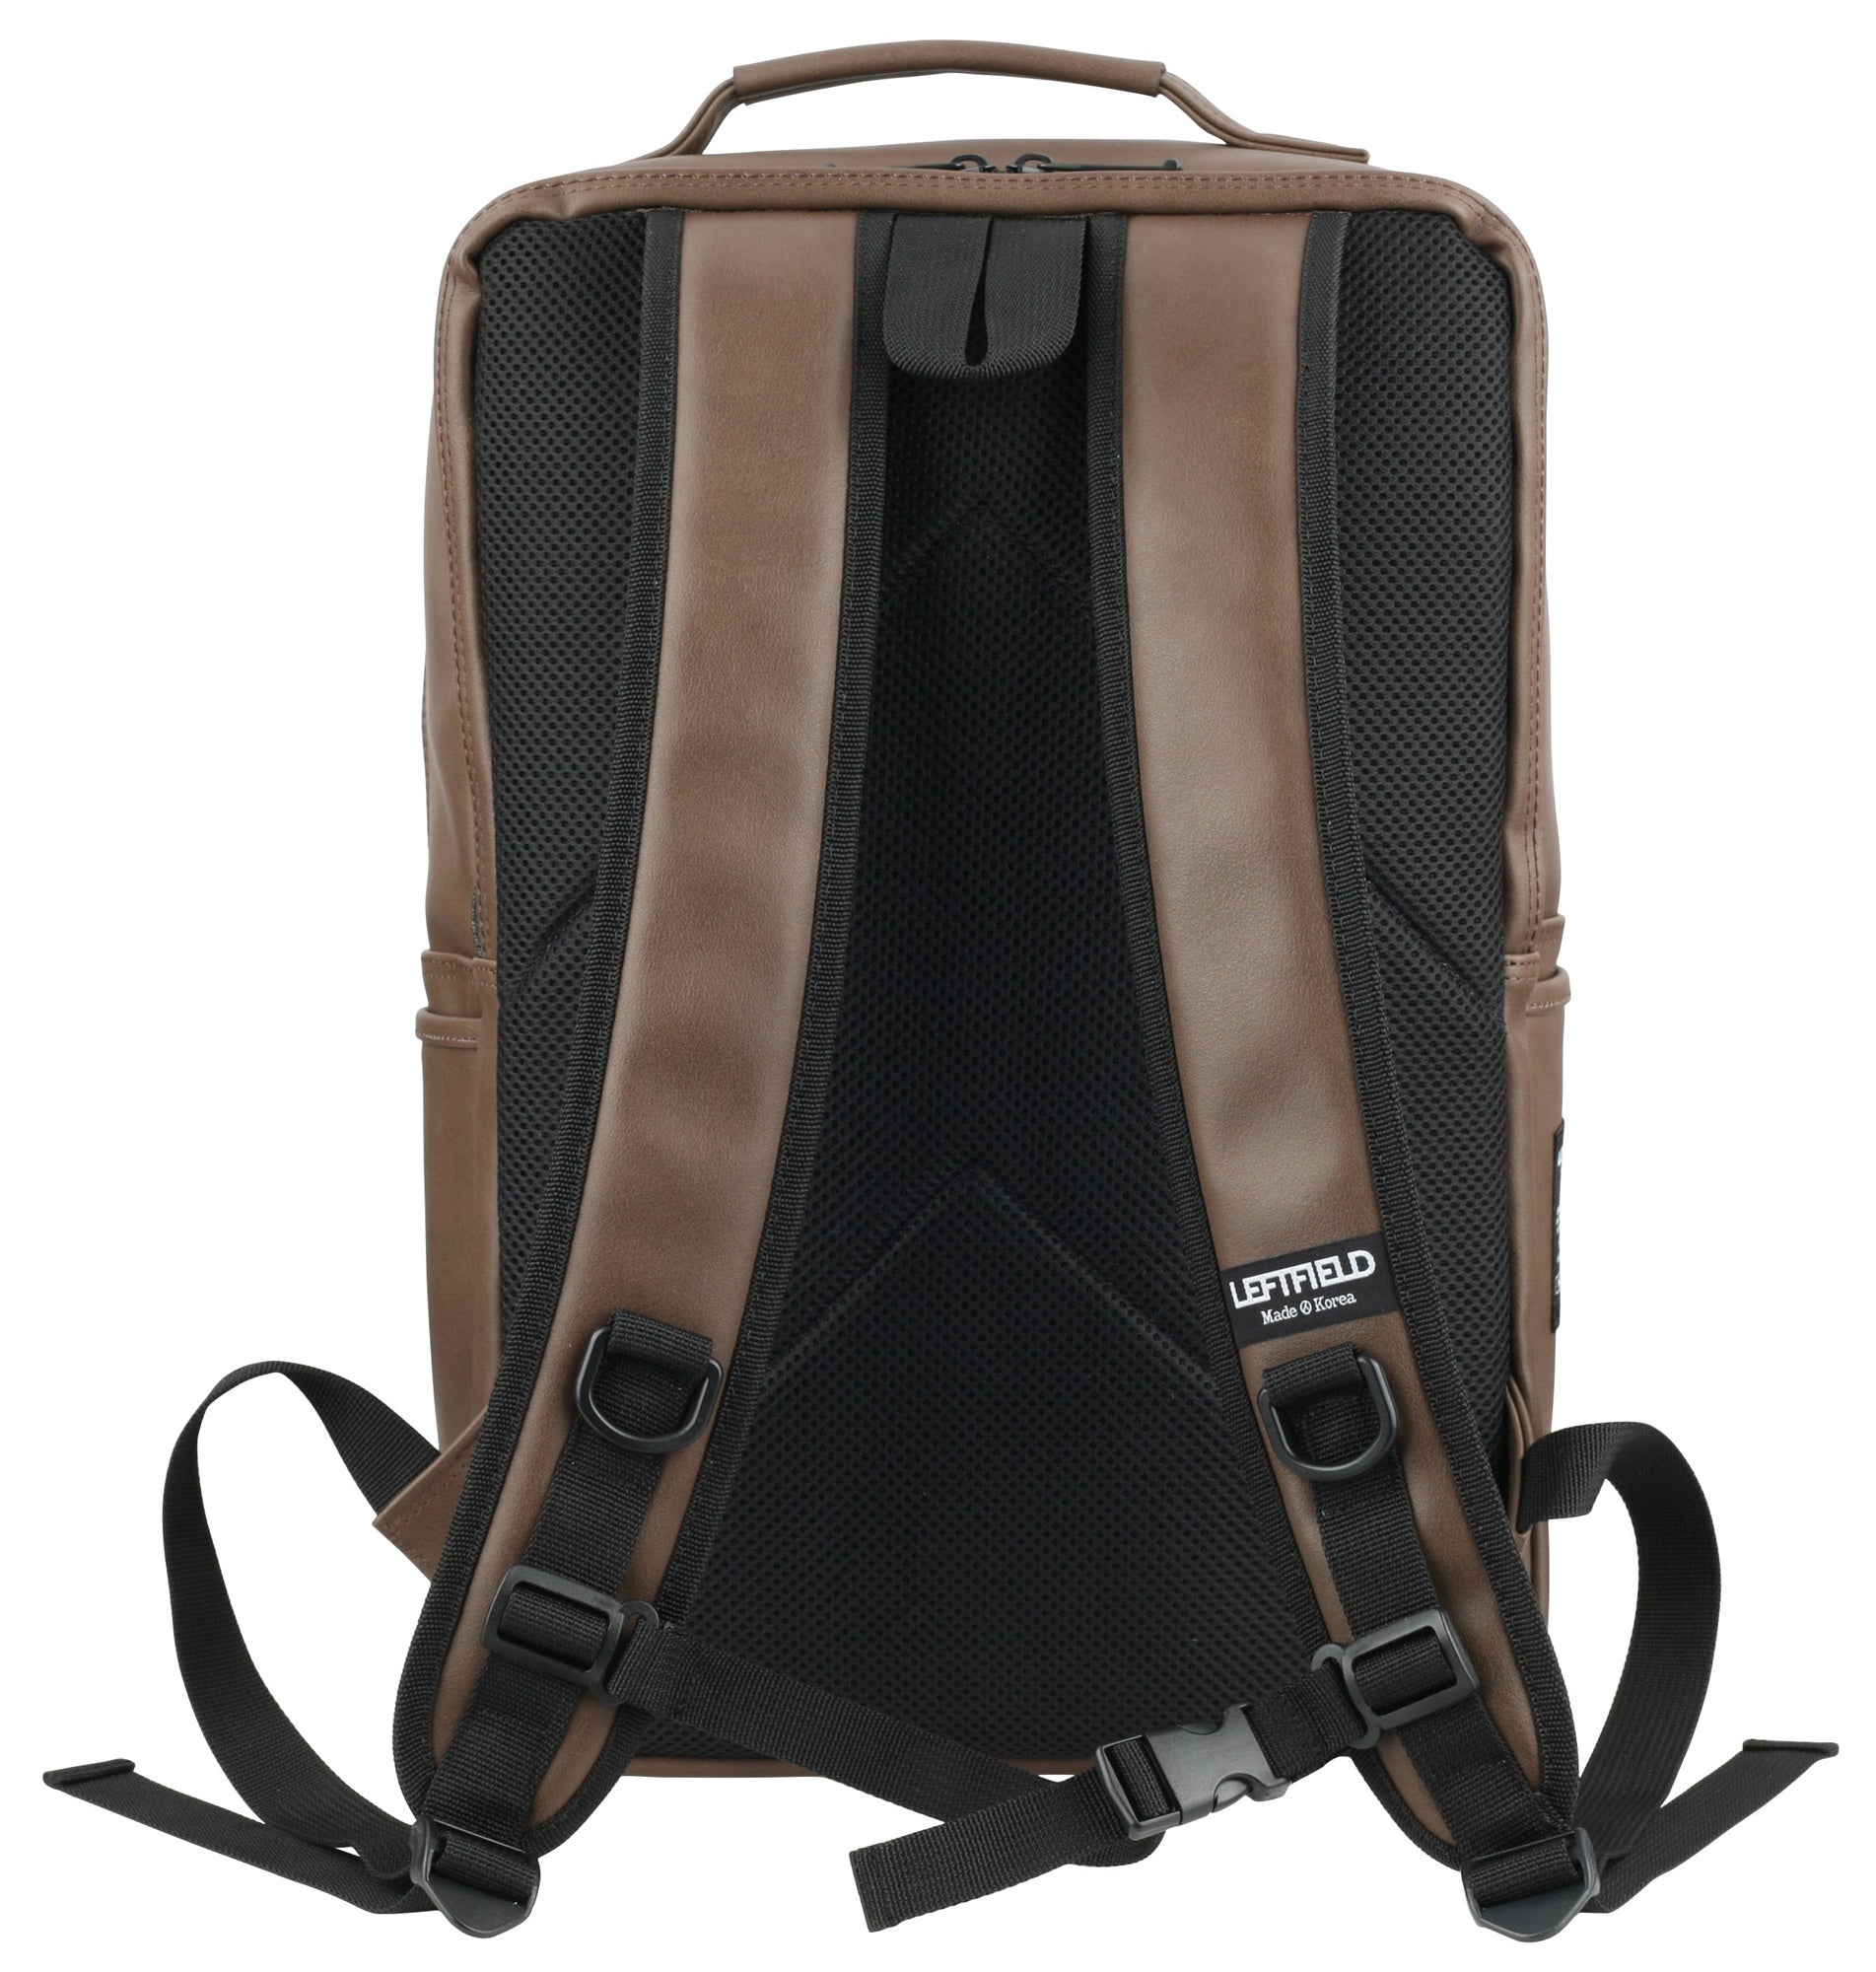 Brown Vintage Synthetic Leather Casual Business Backpacks